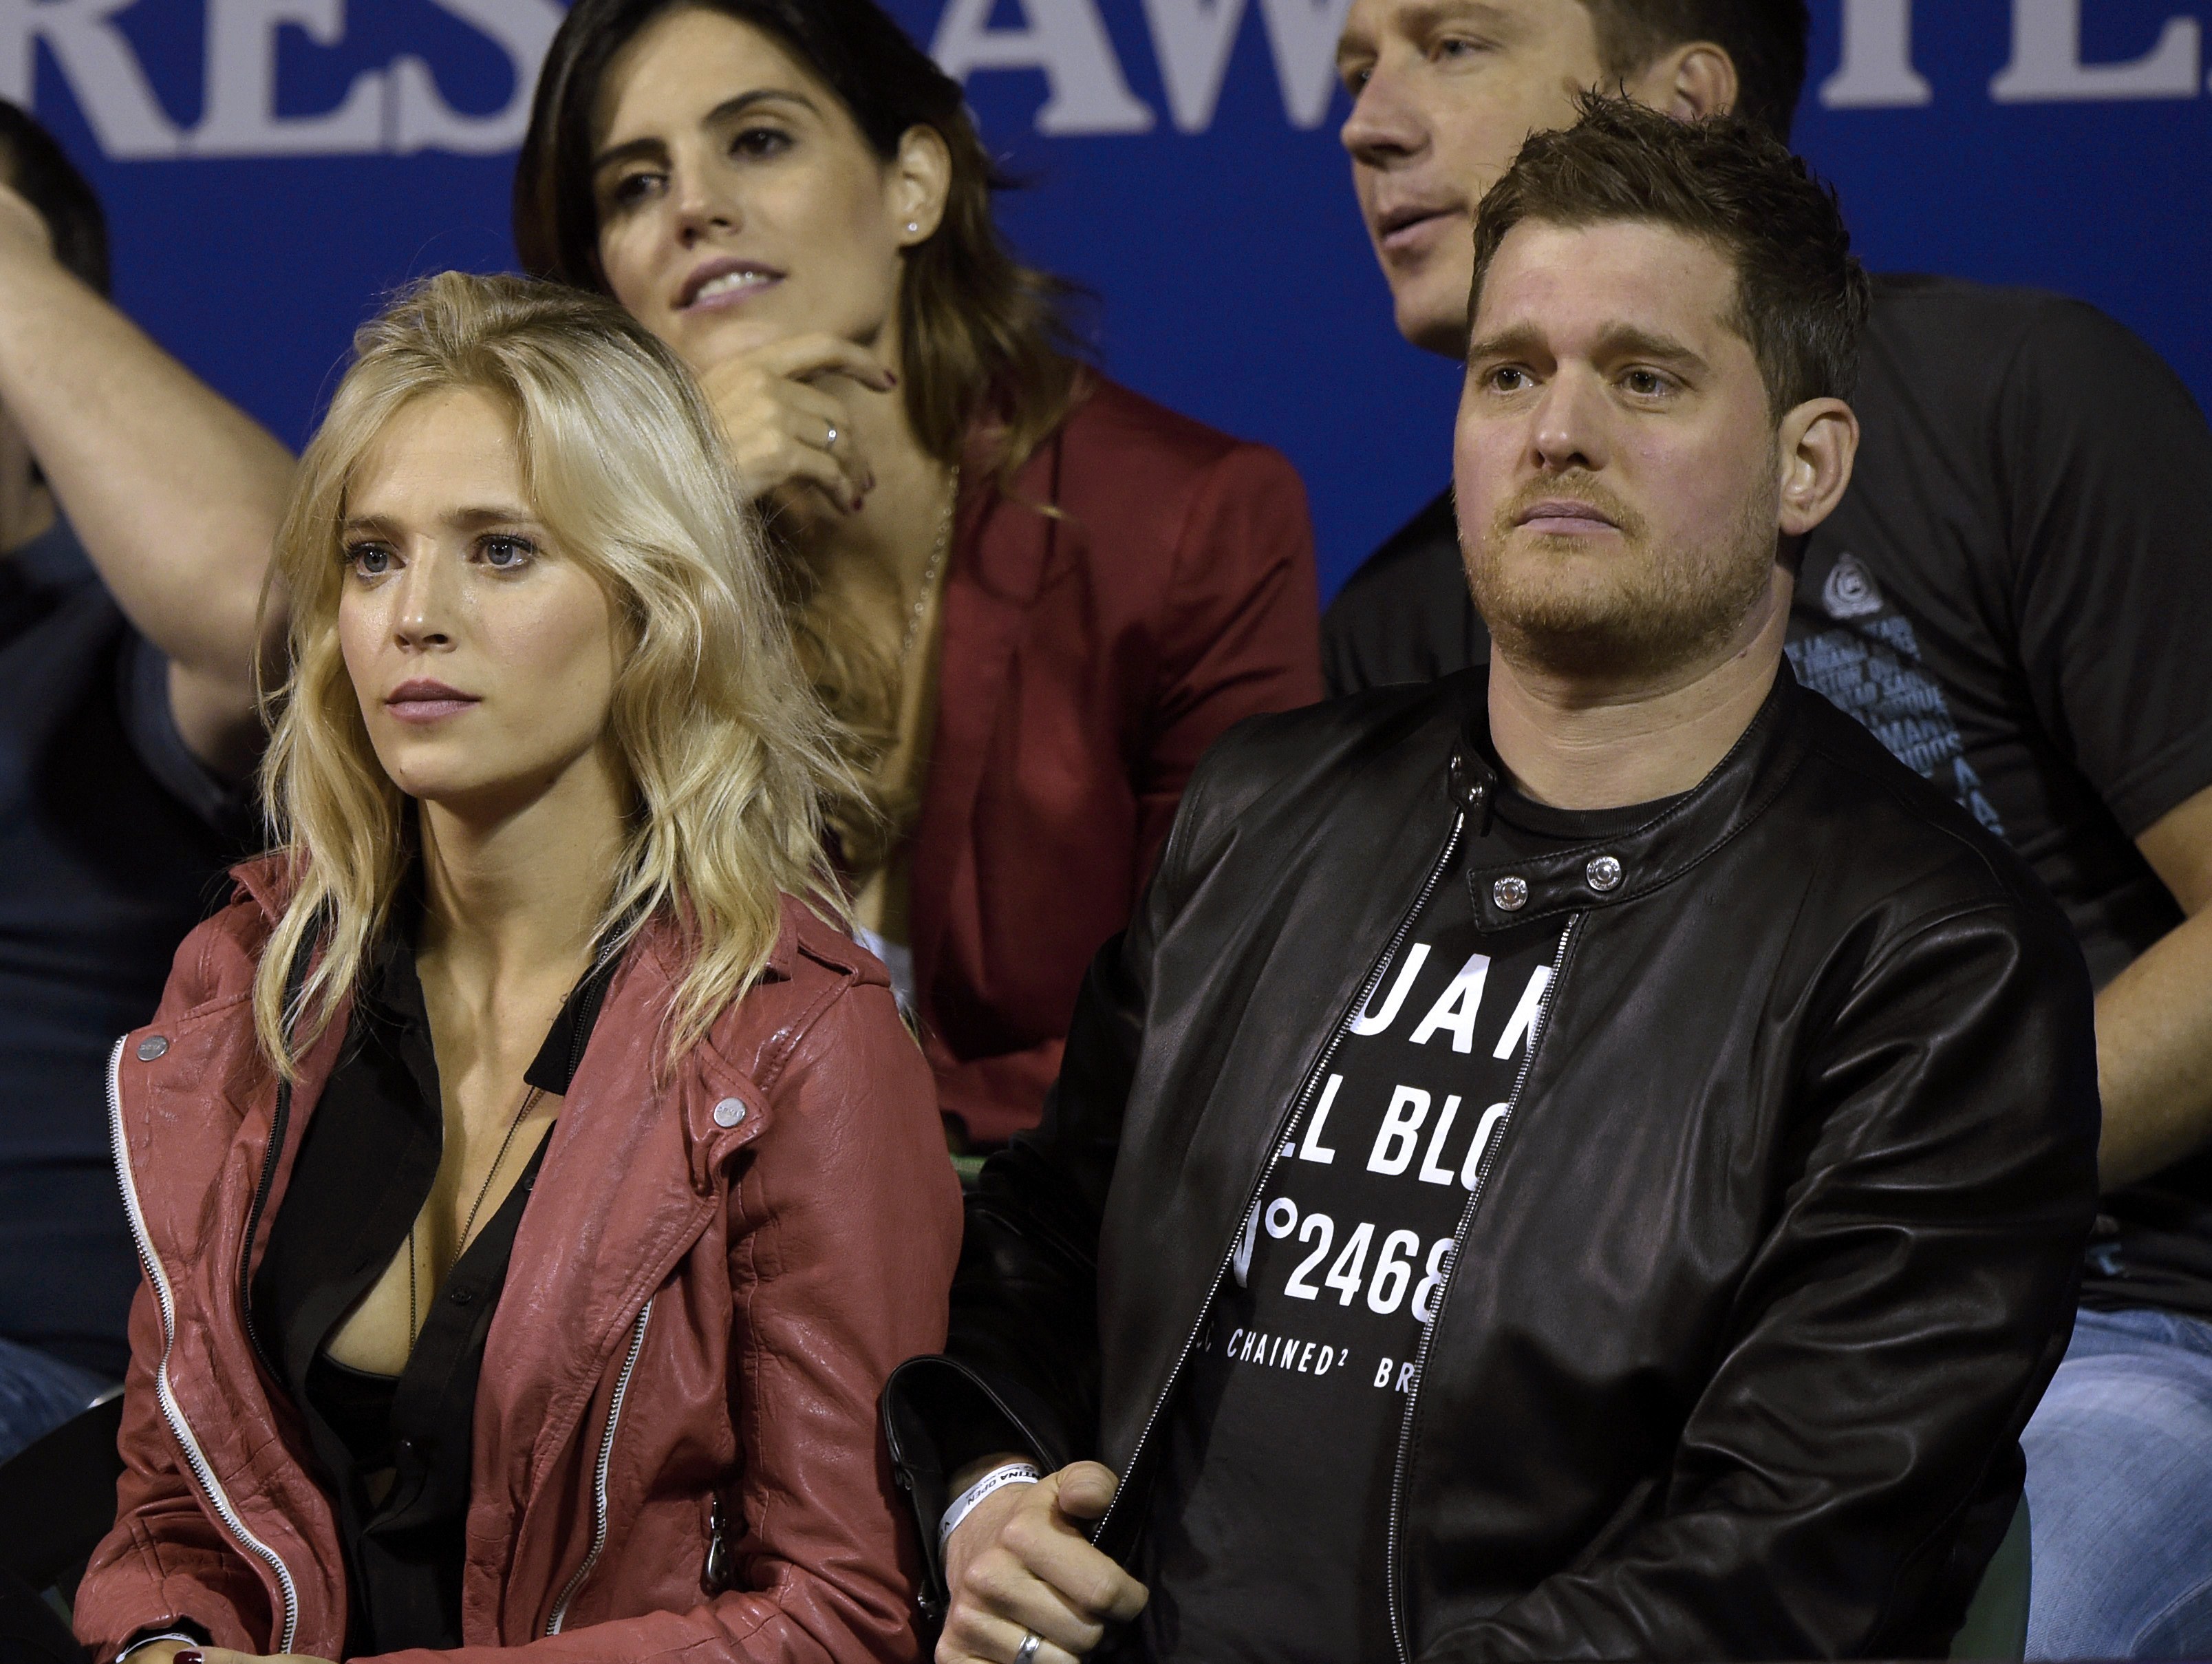 Luisana Lopilato and Michael Bublé attend the ATP Argentina Open tennis match in Buenos Aires on February 27, 2015. | Source: Getty Images